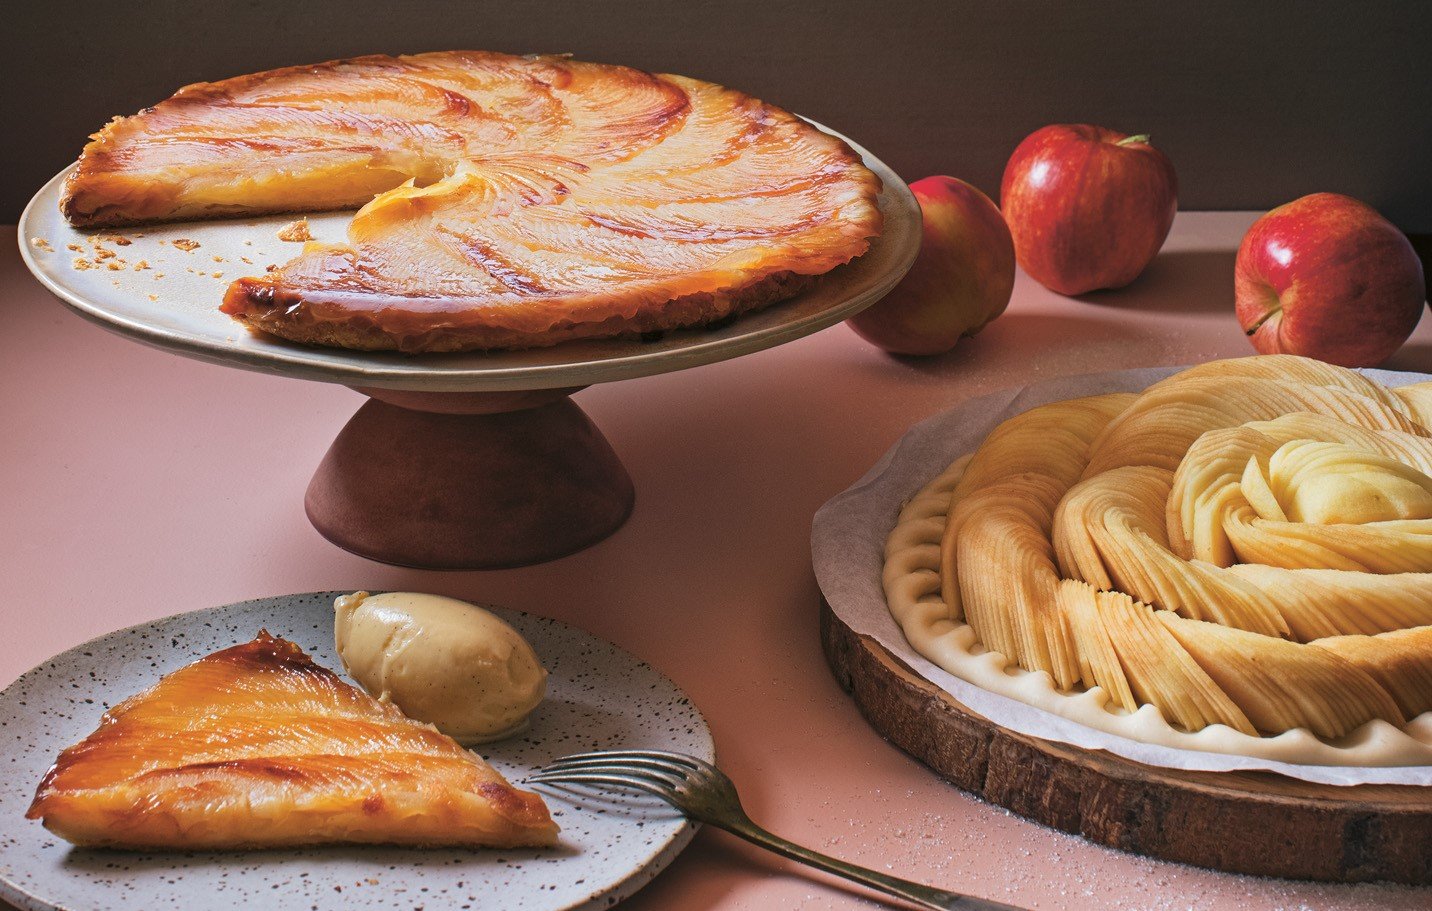 Chef Thierry Busset's Famous Apple Tart